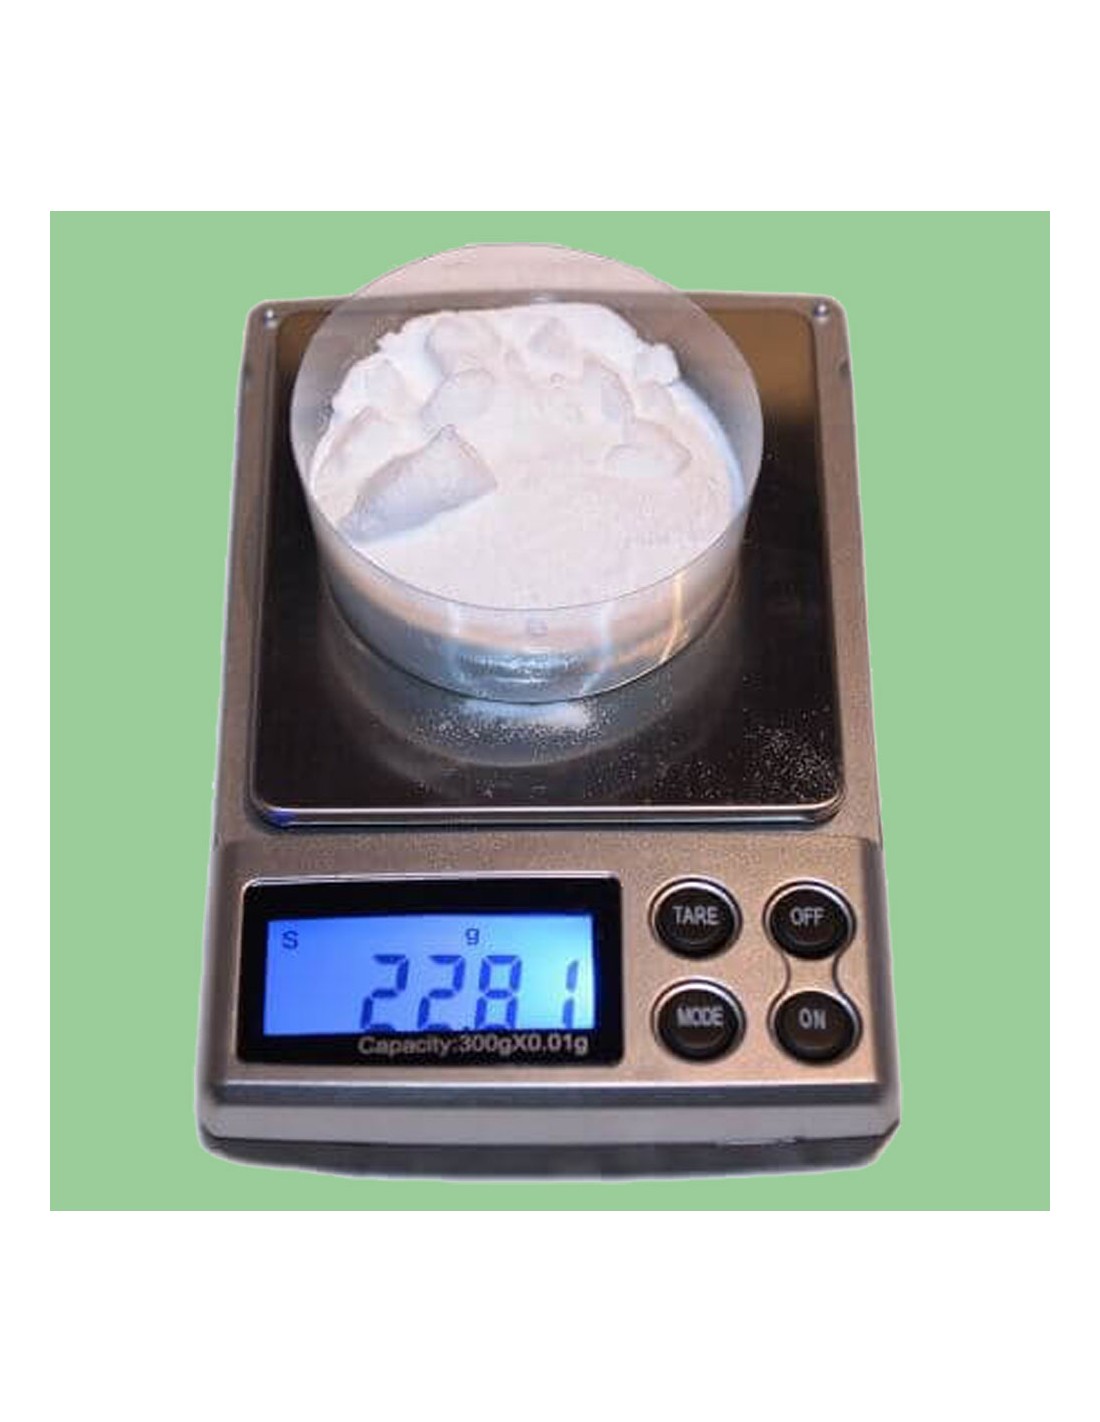 https://dsrproducts.co.uk/141-thickbox_default/dsr-precision-scale-500g-001g.jpg